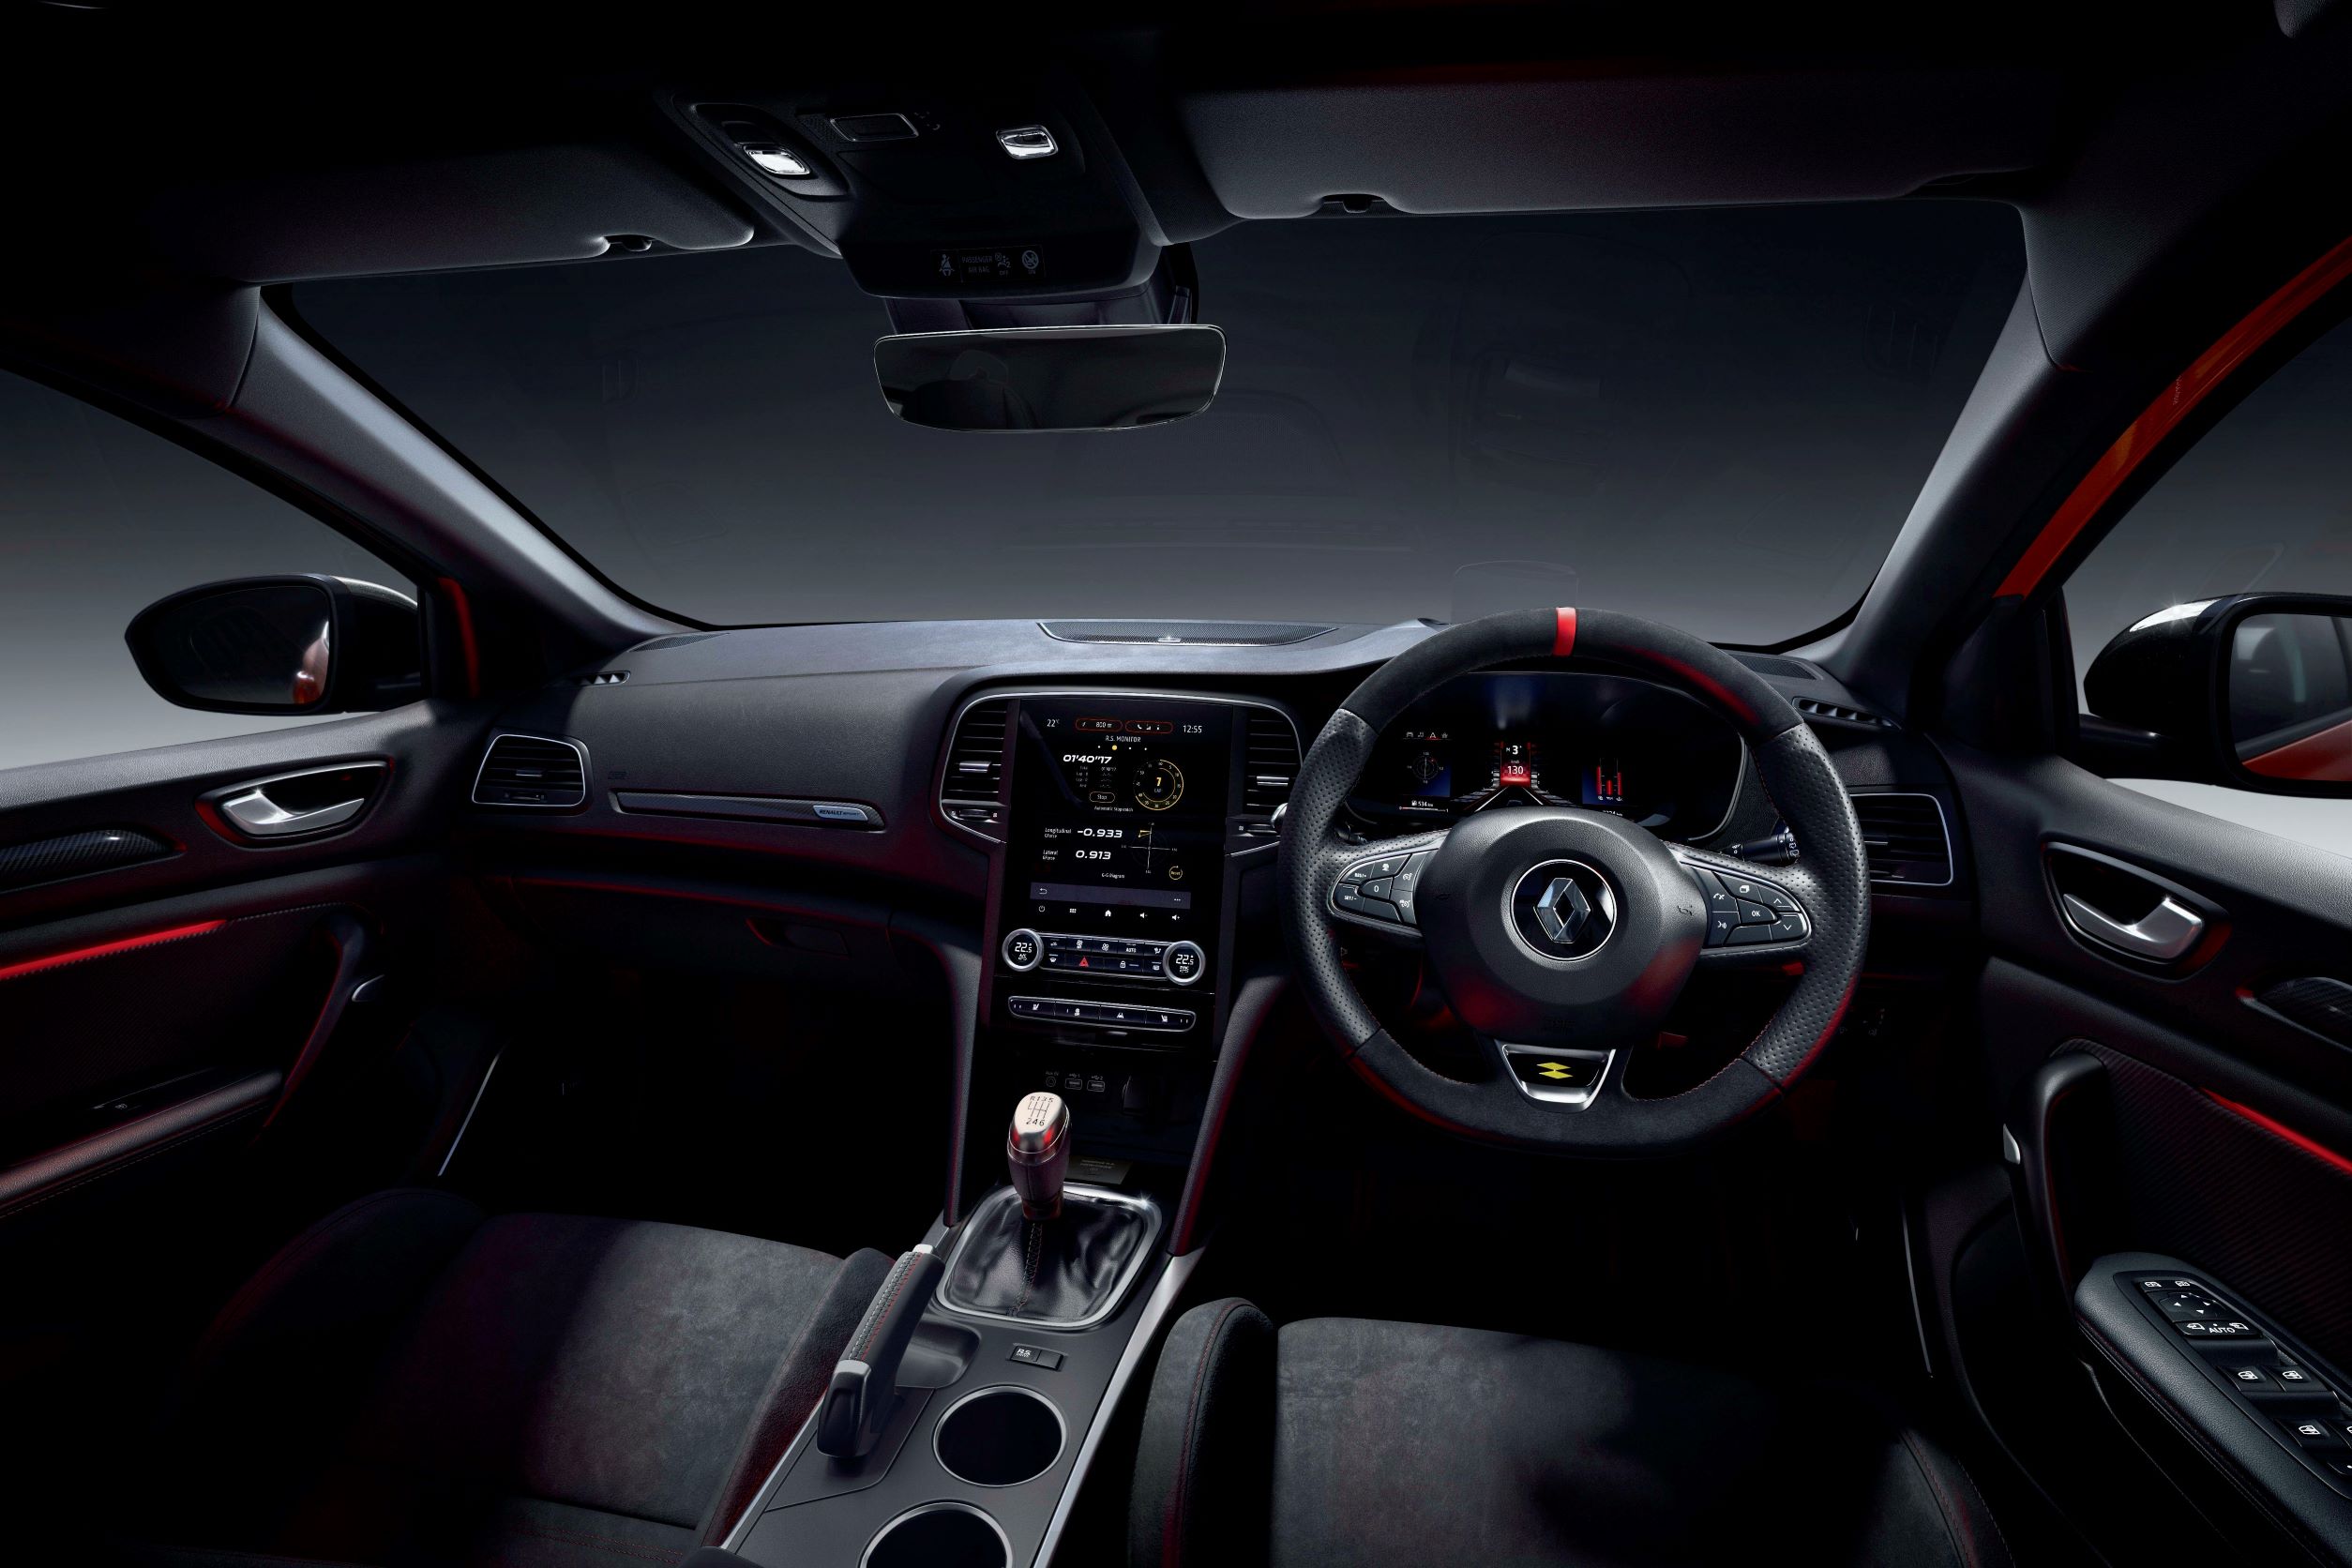 Interior of the Renault Megane R.S. Ultime